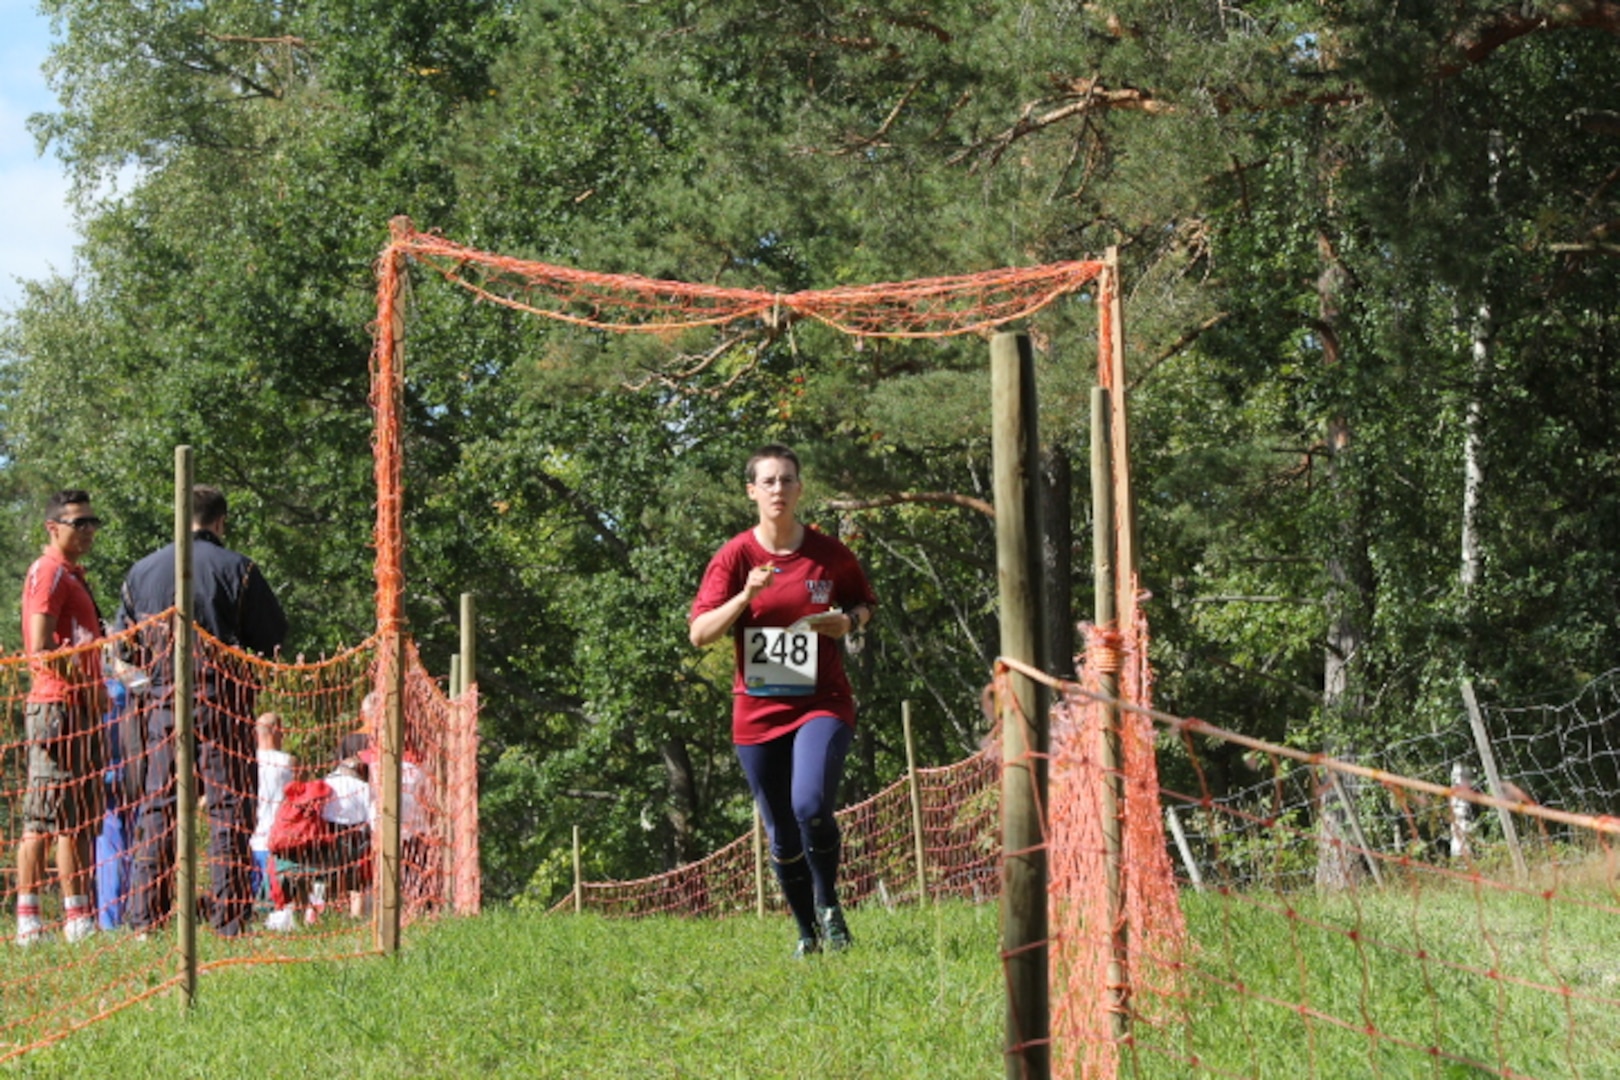 2LT Hannah Culberg (Army)leads the U.S. charge at the 2013 CISM World Orienteering Military Championship hosted by the Swedish Armed Forces in Eksjo, Sweden from 26 August to 1 September.